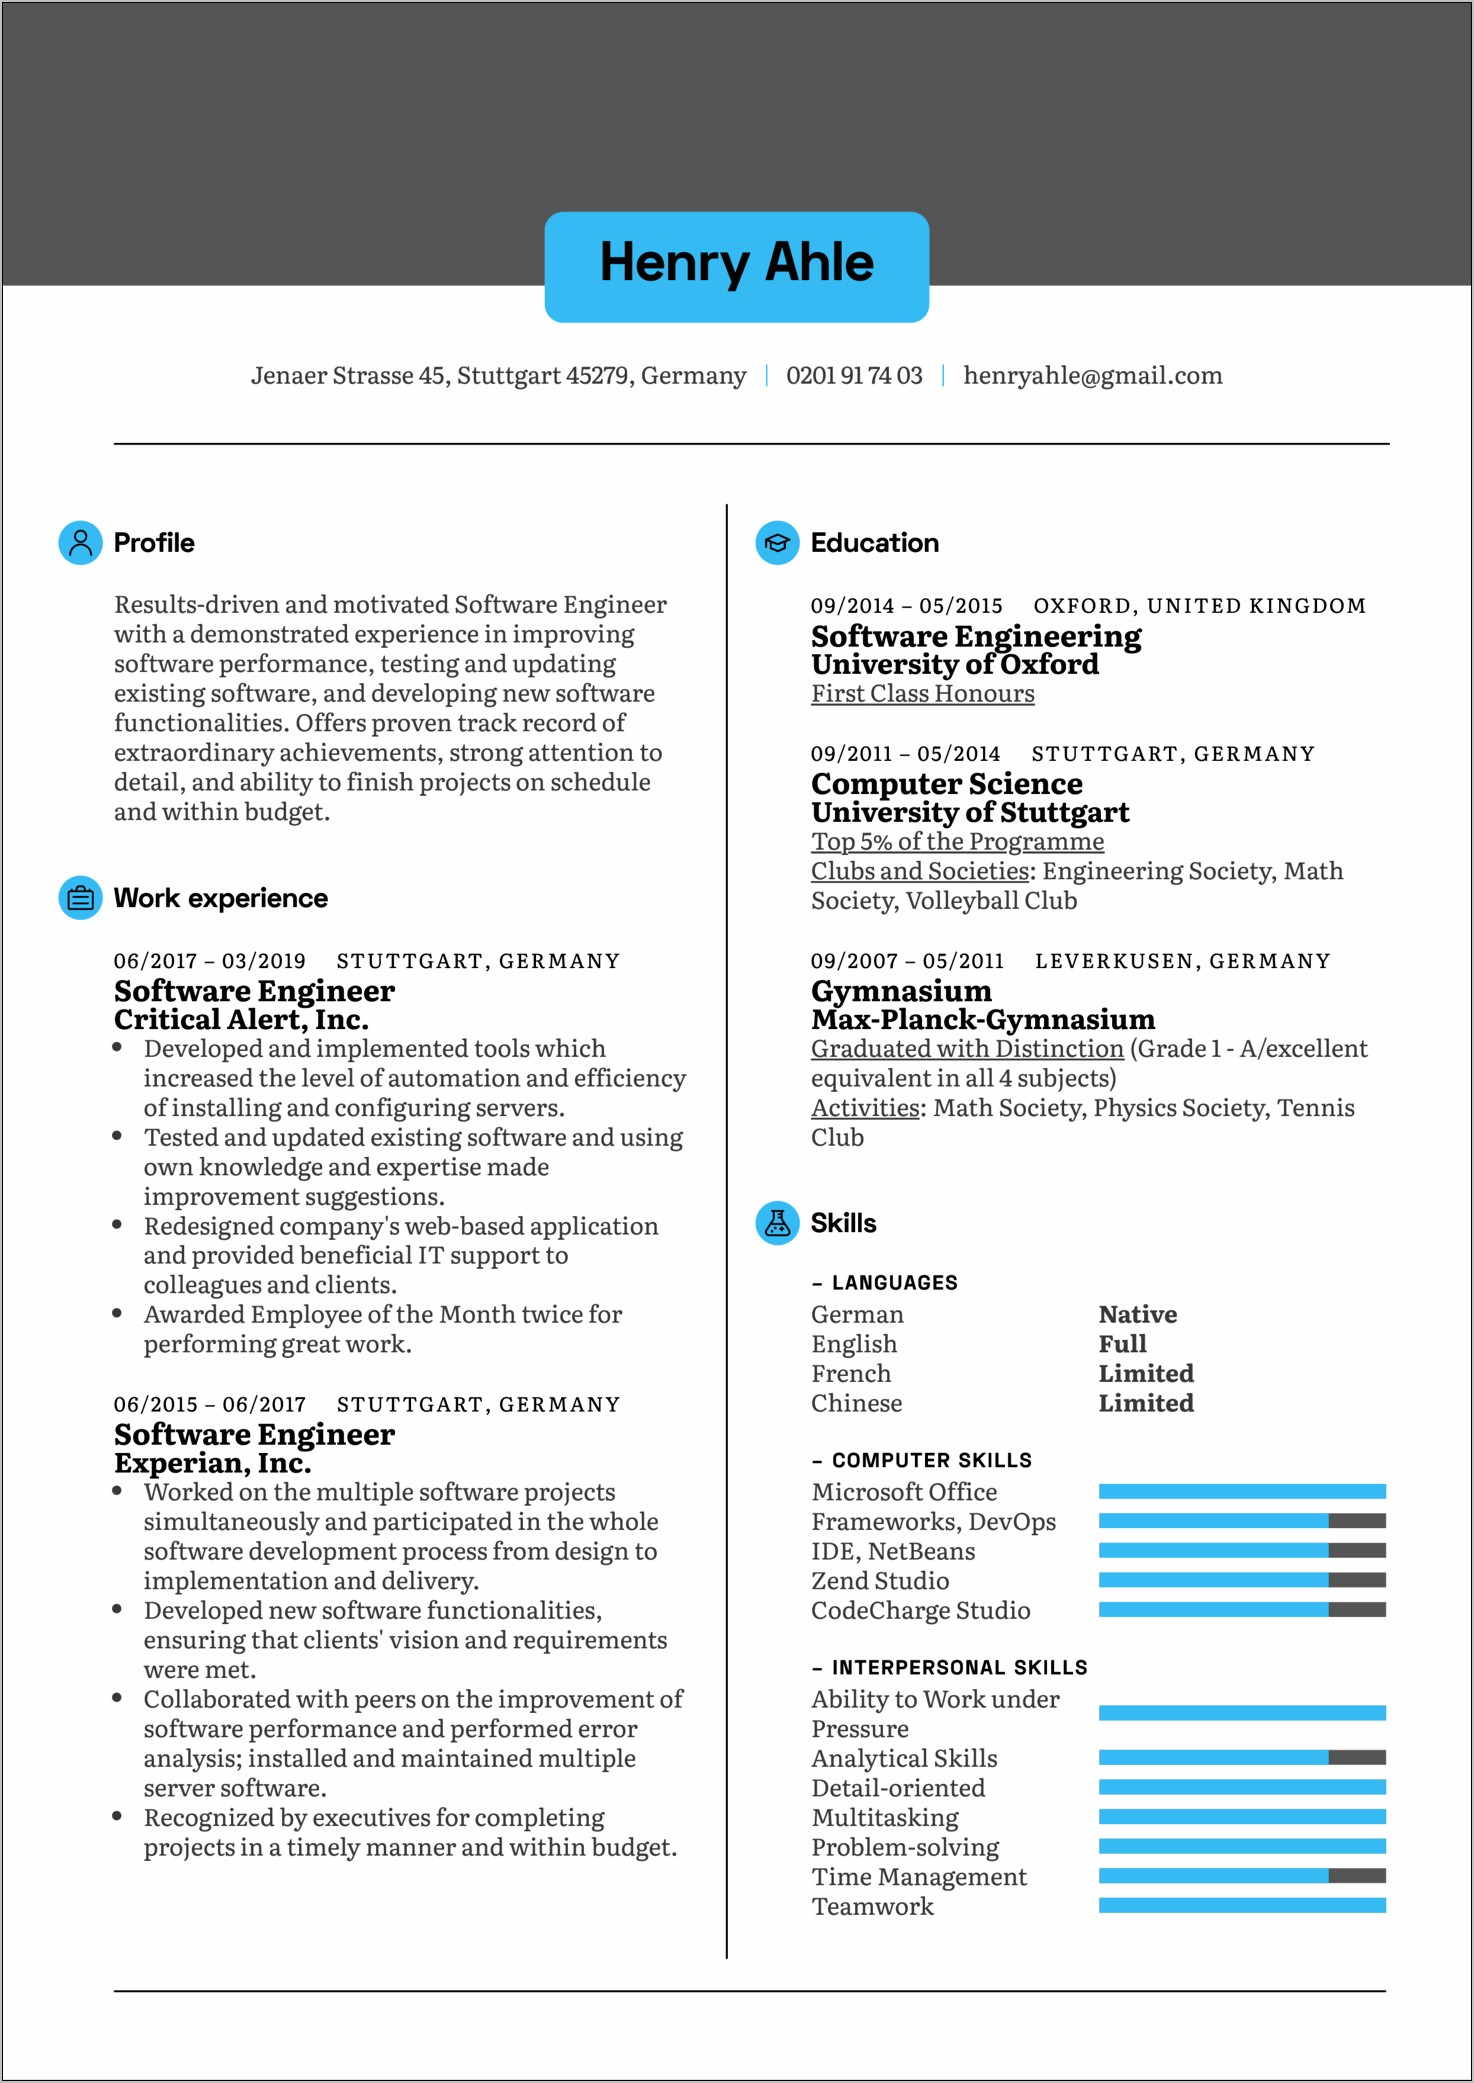 Sample Experienced Software Coder Resume